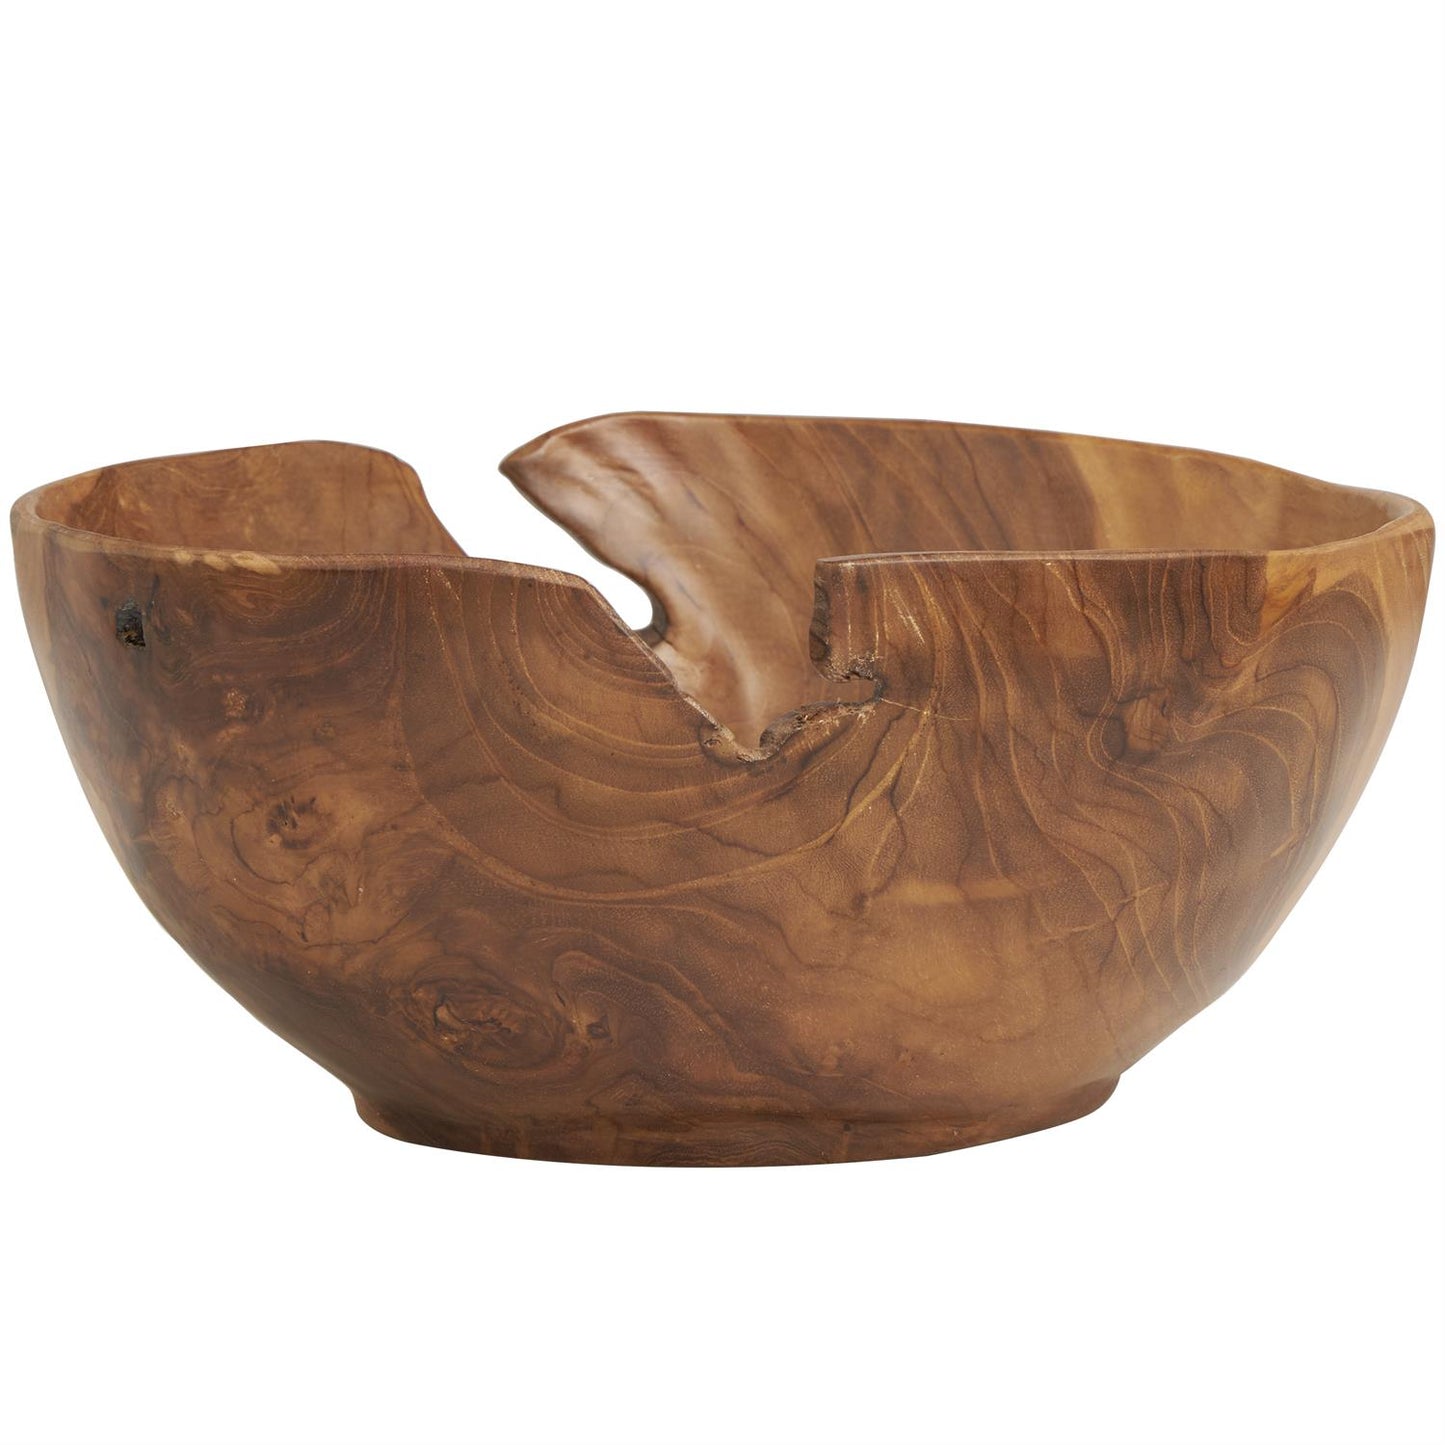 Brown Teak Wood Handmade Decorative Bowl With Natural Grooves